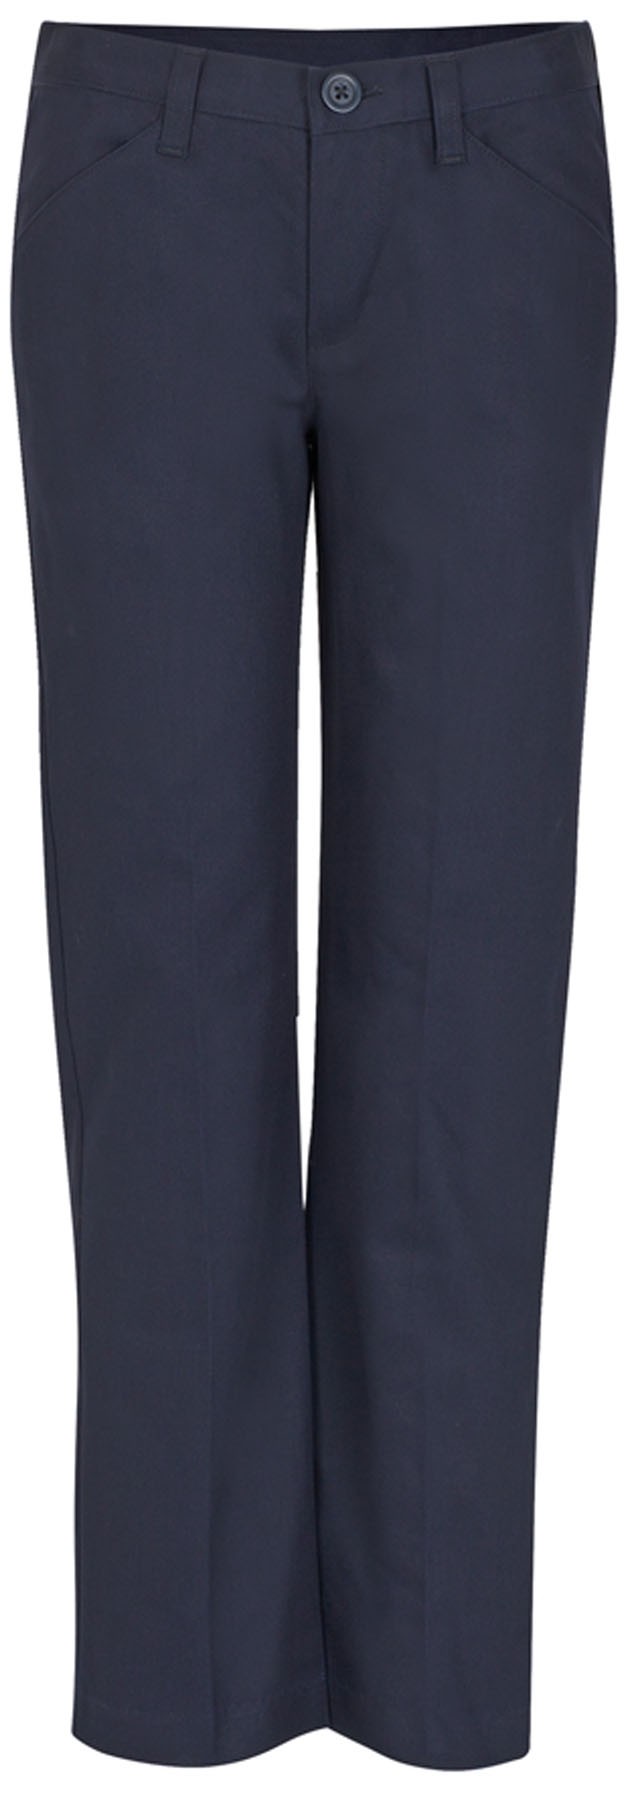 Girls Pants- Solid Color- Flat Front-Navy